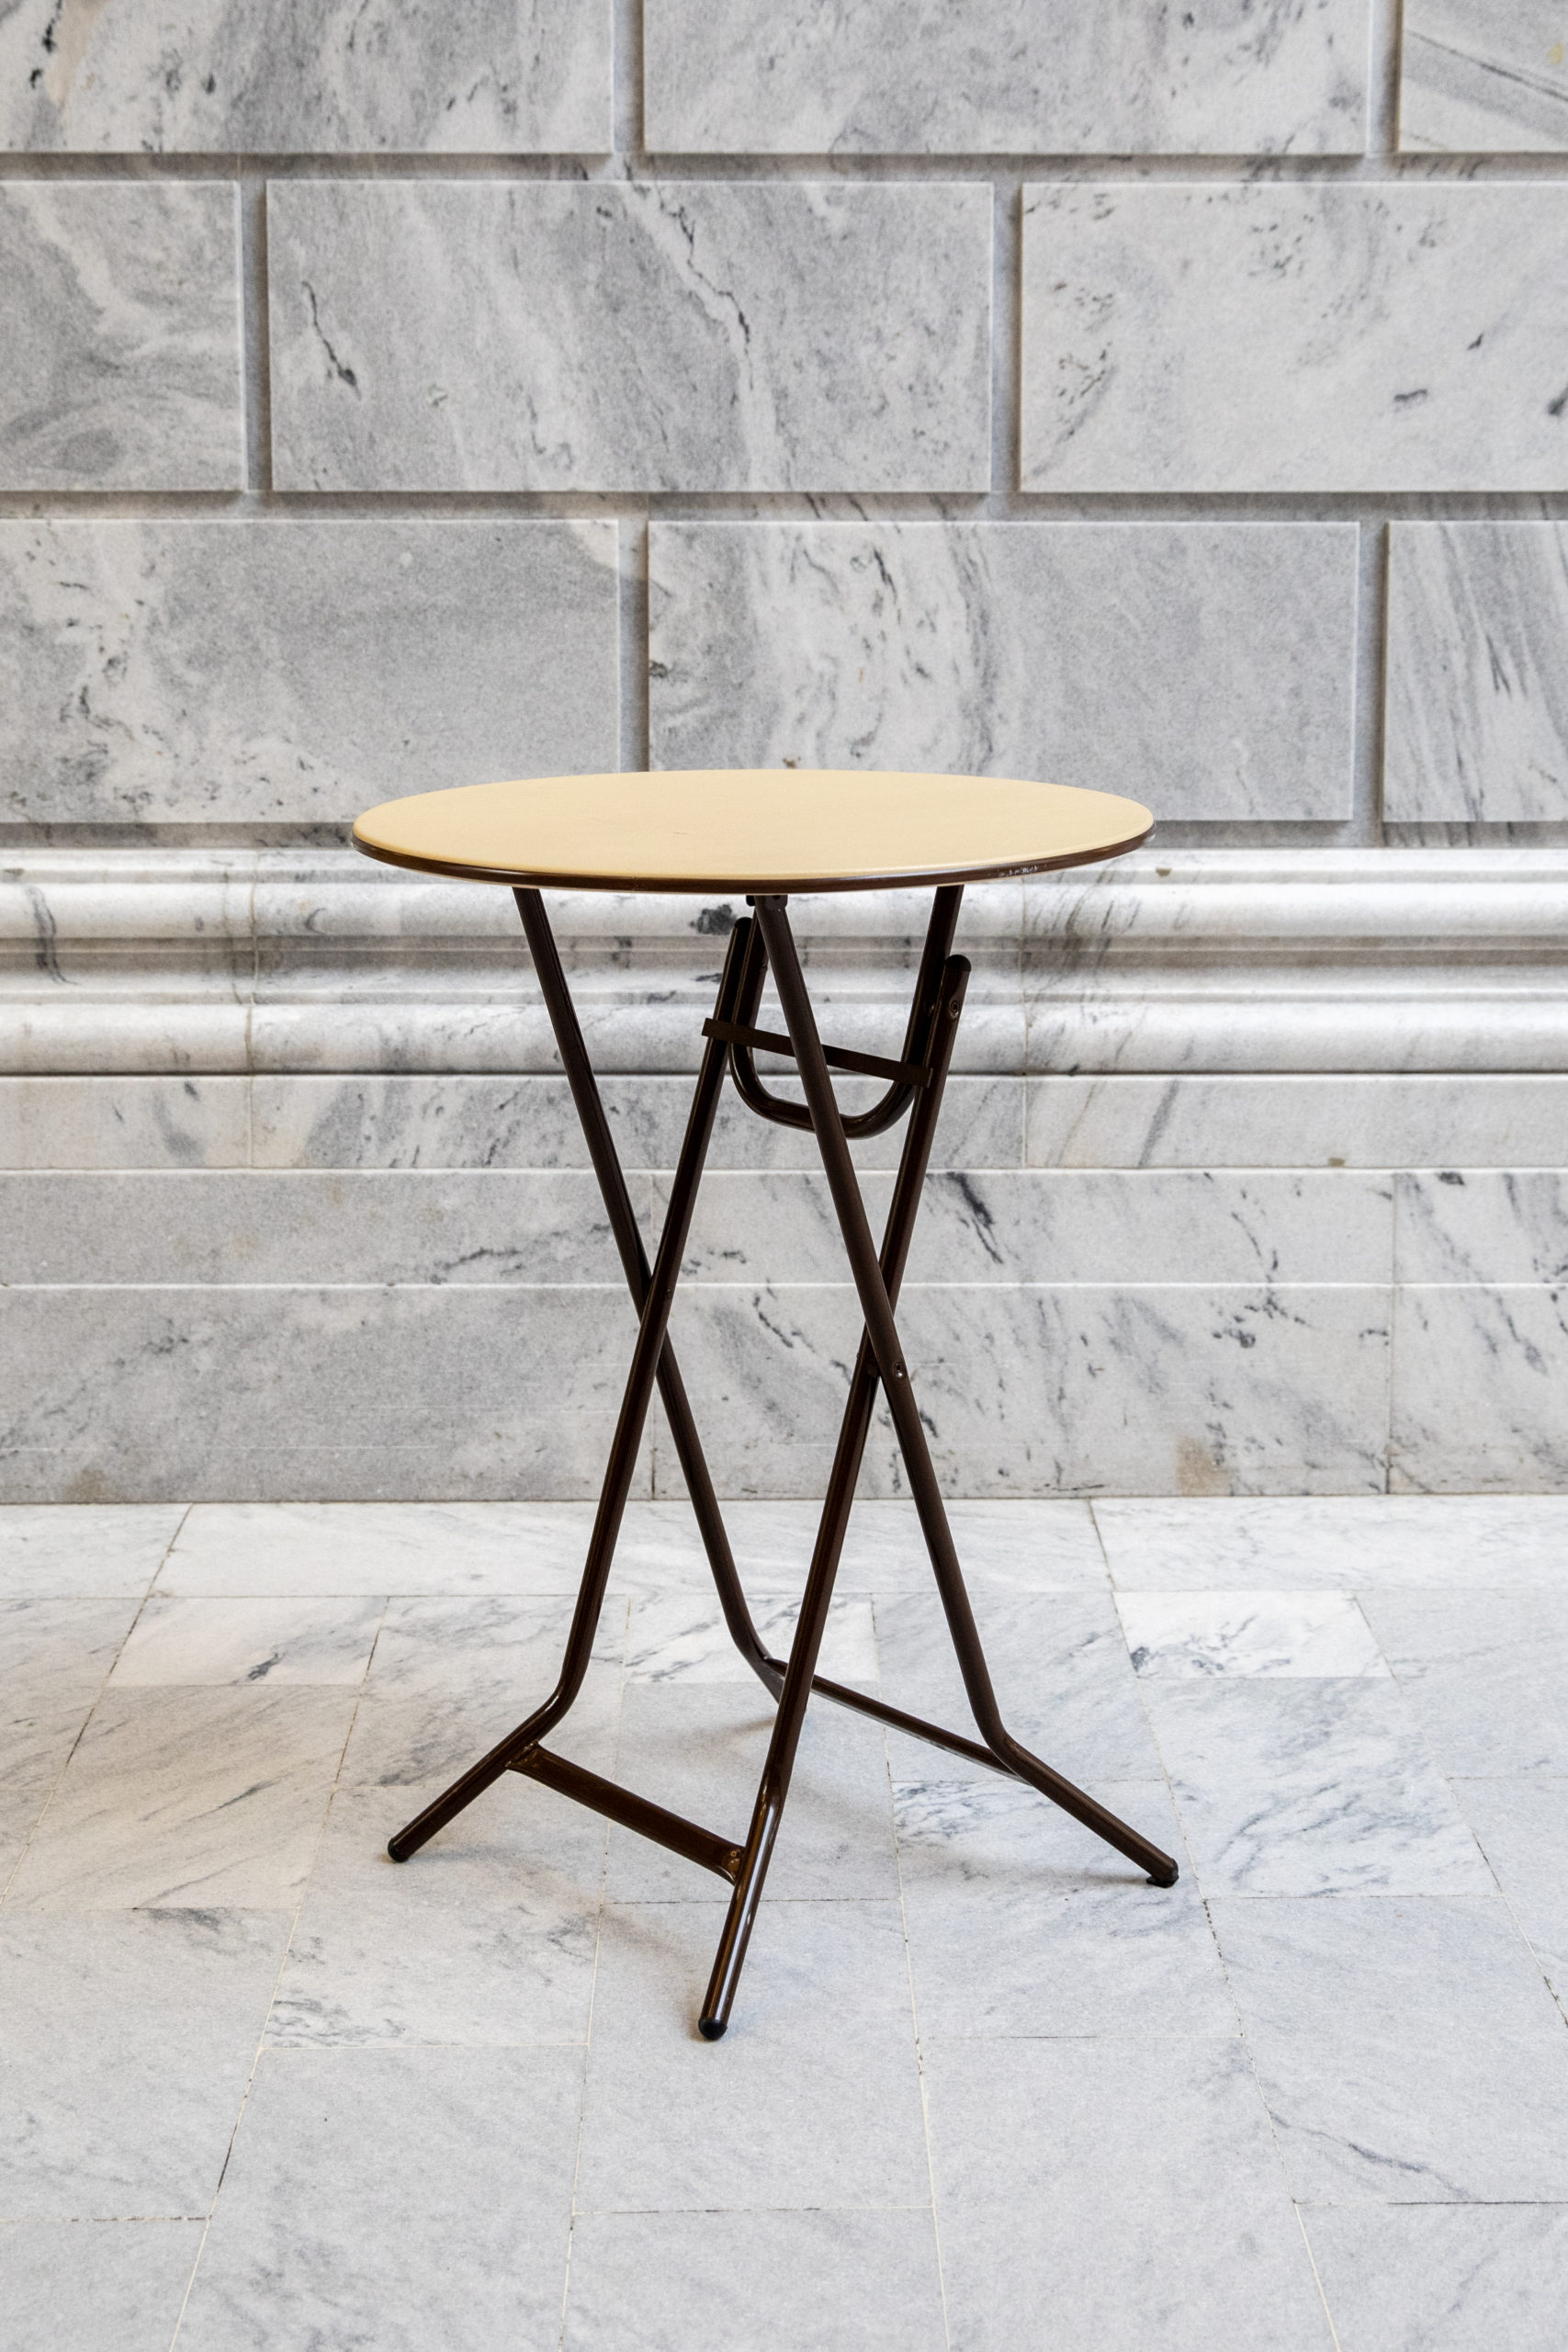 Pedestal Table with marble backdrop